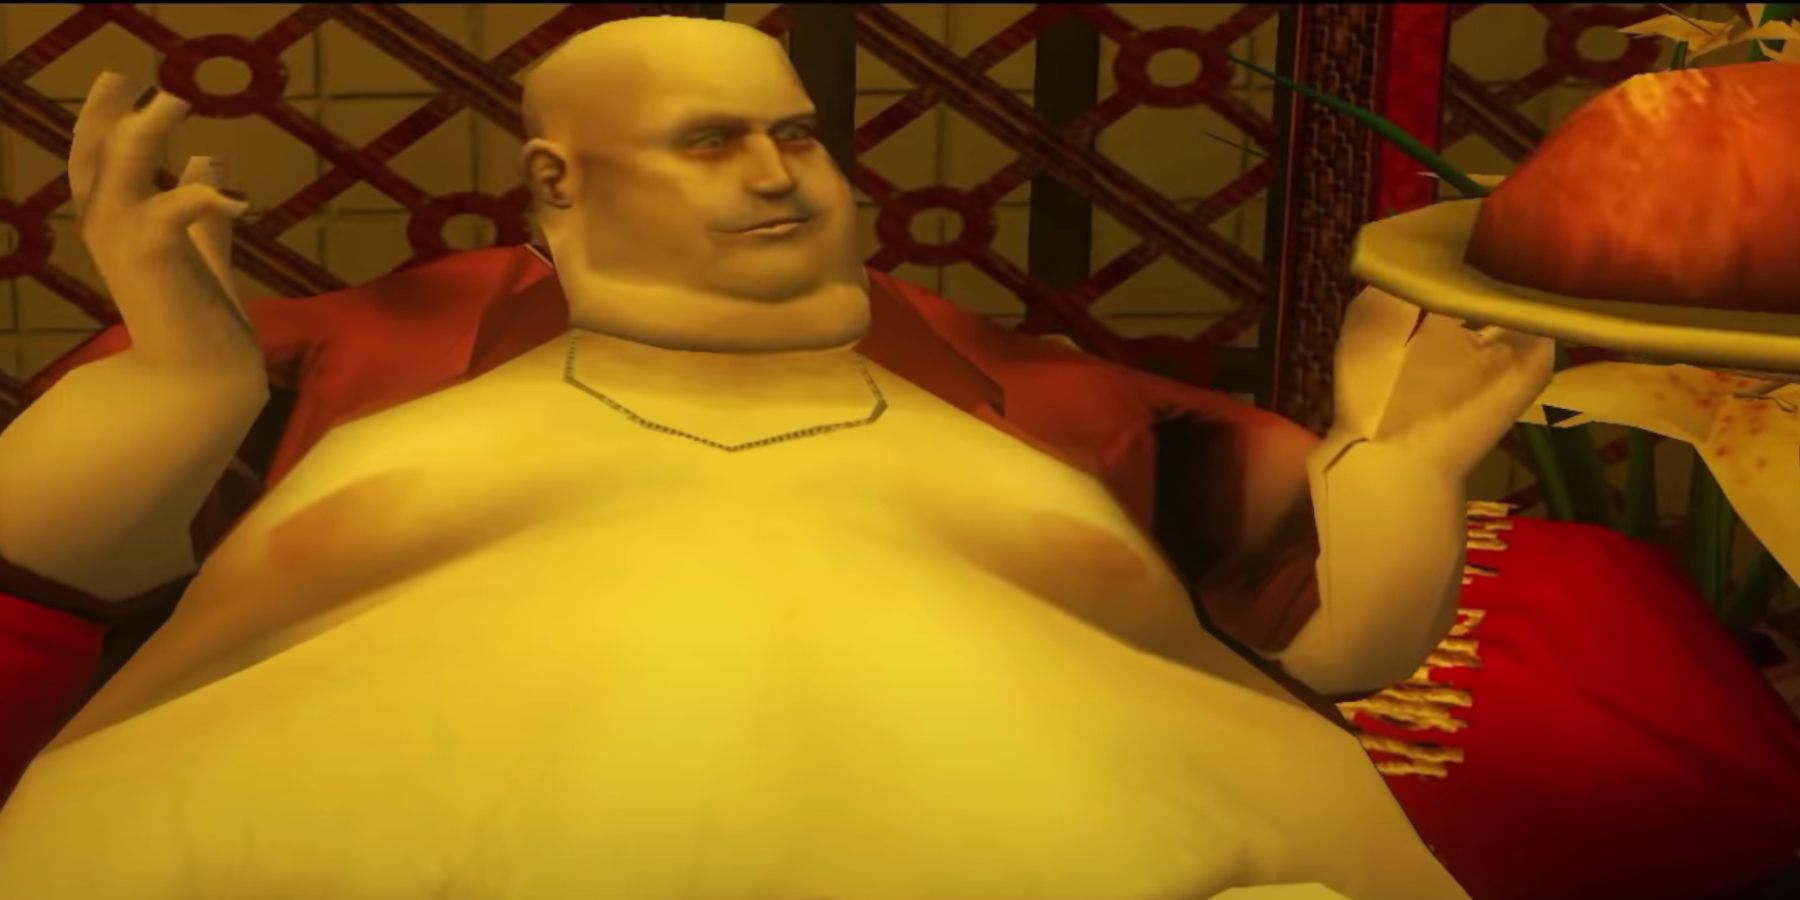 Hitman Contracts - Feeding the Meat King poisoned food